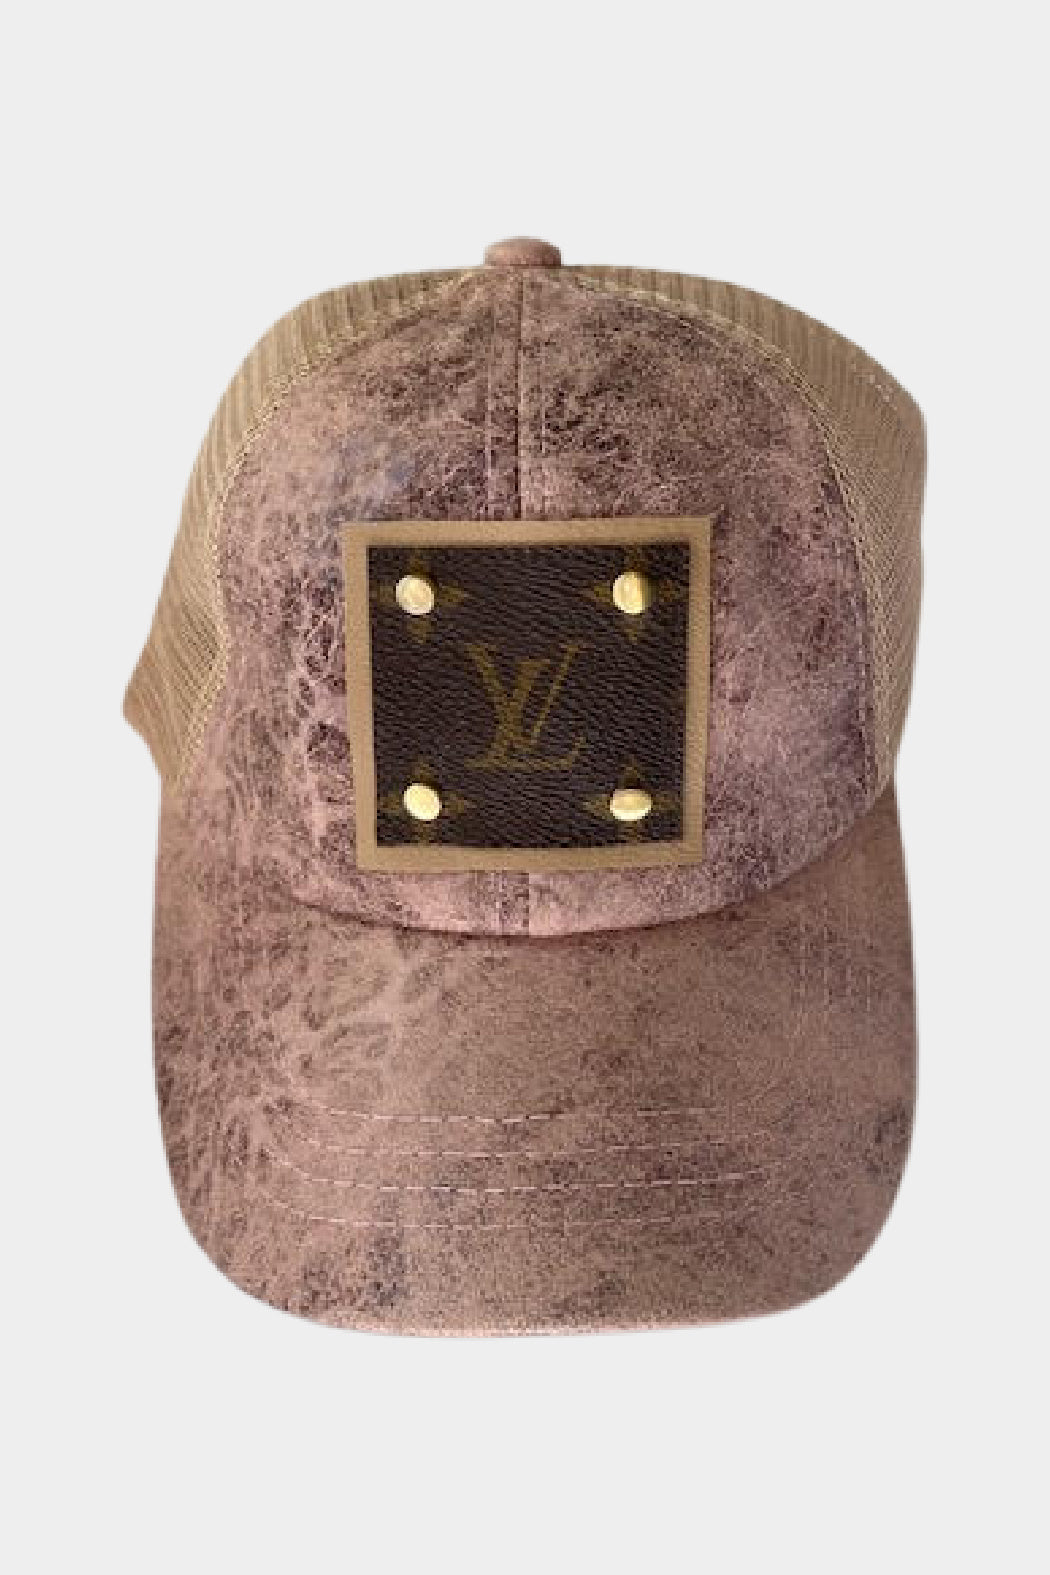 Up-Cycled Textured Suede Baseball Cap - Embellish Your Life 